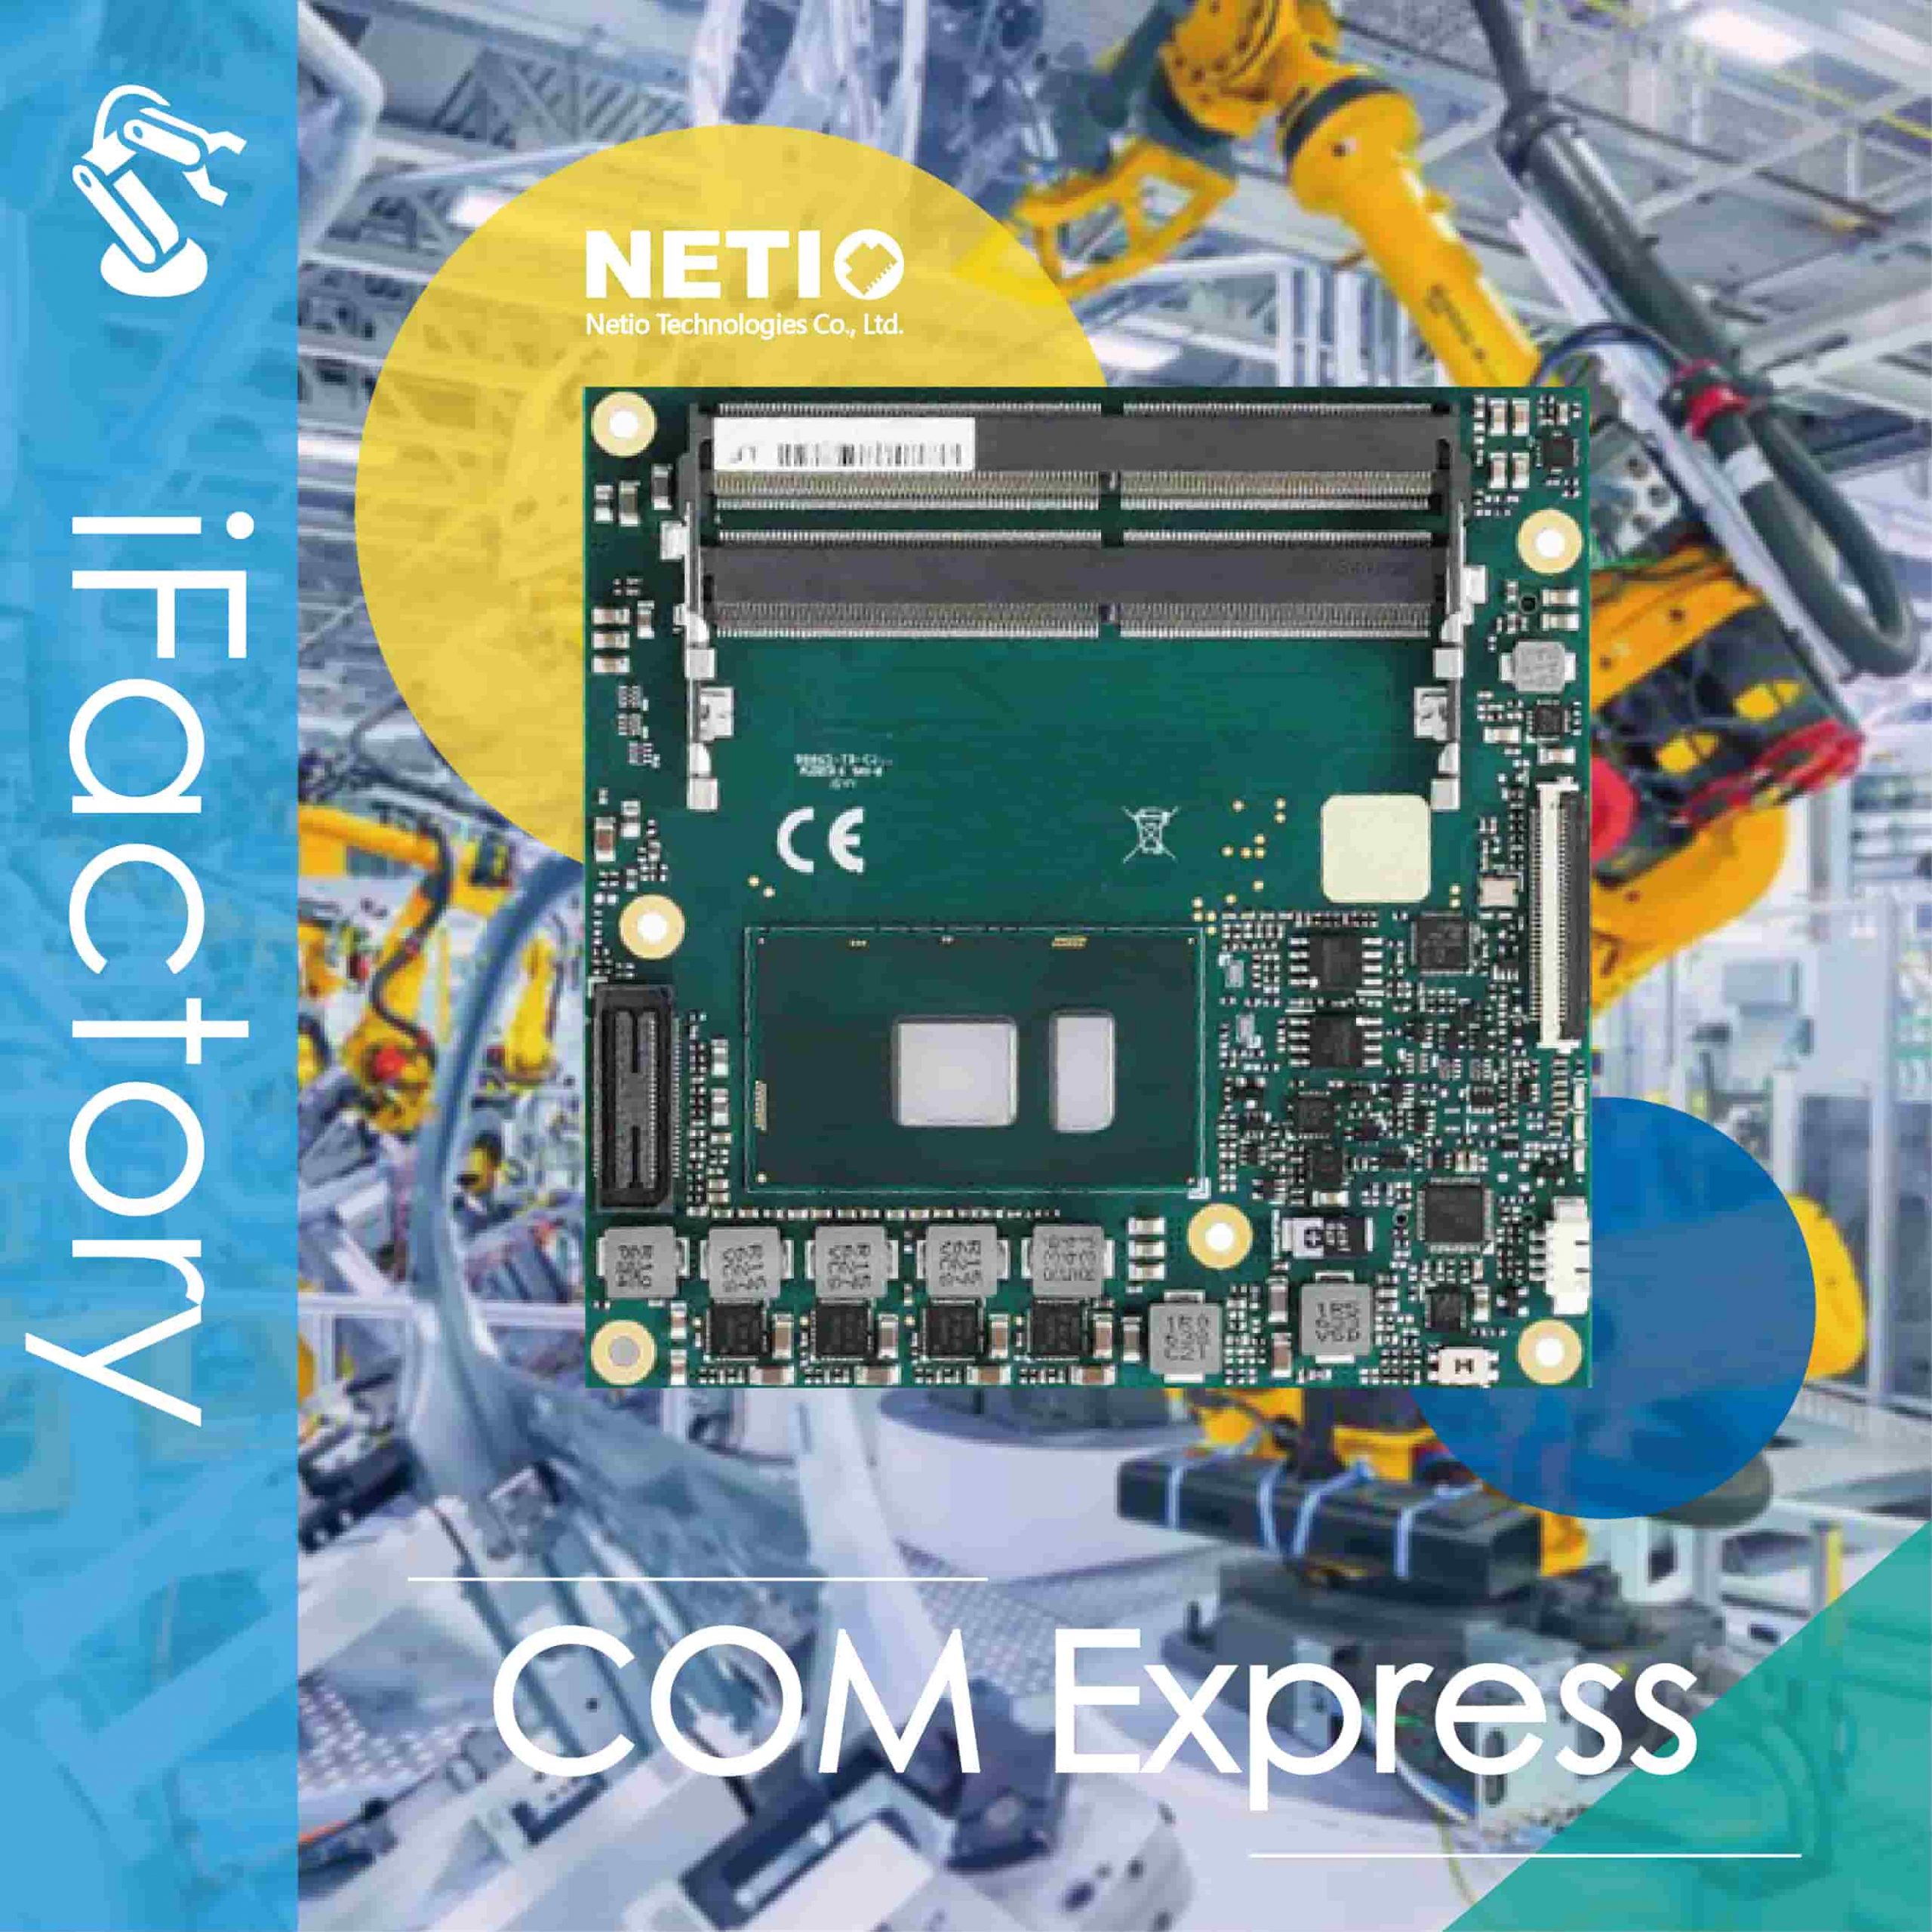 COM Express has demonstrated experience in industrial-grade applications in machine automation, marine, transportation, medical care and other connectivity(IoT) uses.